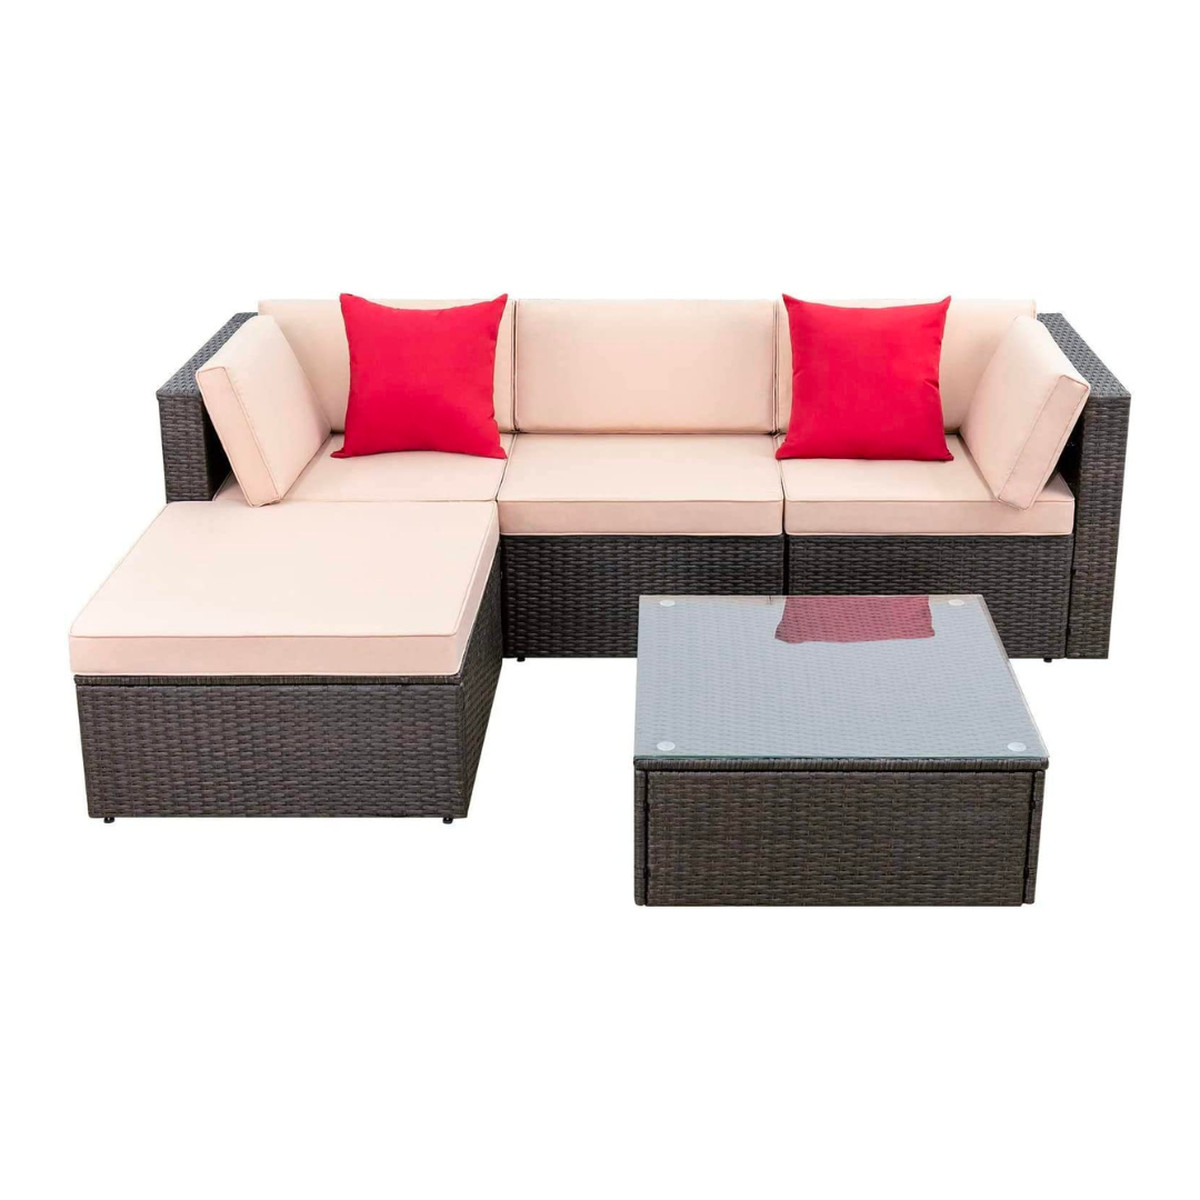 Devoko beige patio furniture set with red accent pillows and glasstop table